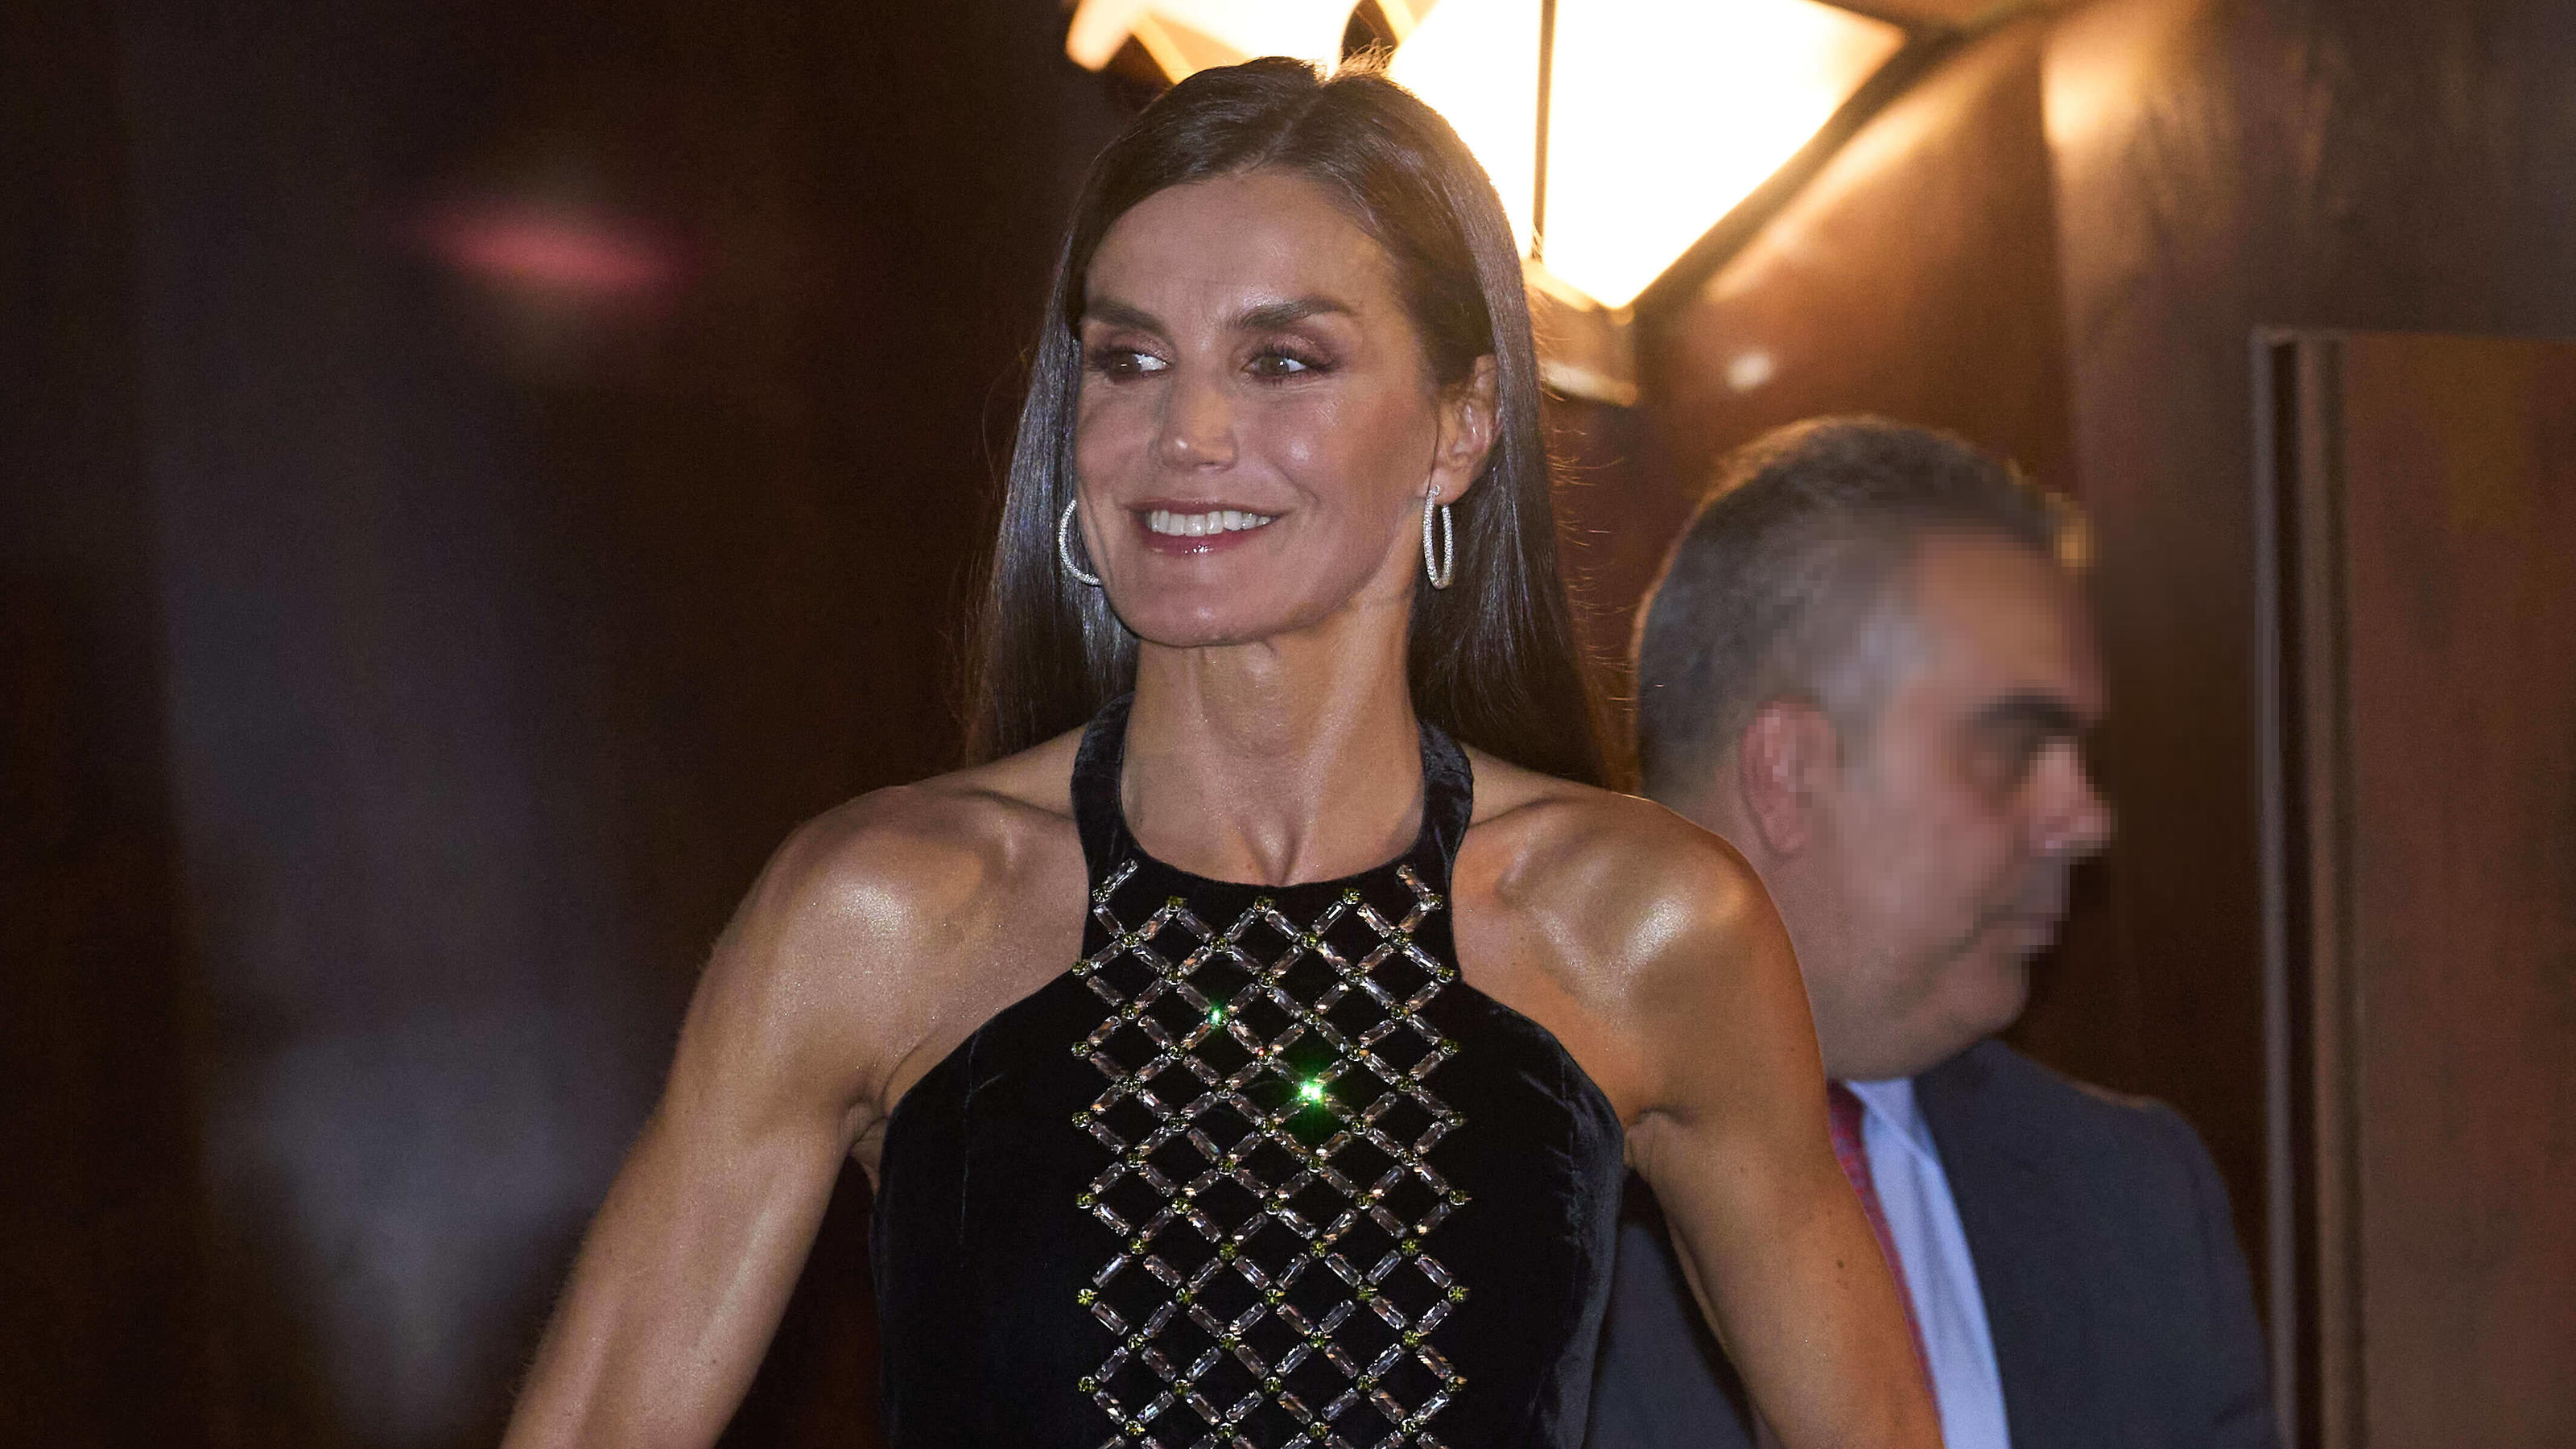  27-10-2022 Oviedo Queen Letizia attend the traditional concert on the eve of the Princess of Asturias awarding ceremony in Oviedo. The Princess of Asturias Awards are given every year to personalities or organizations from all around the world who m